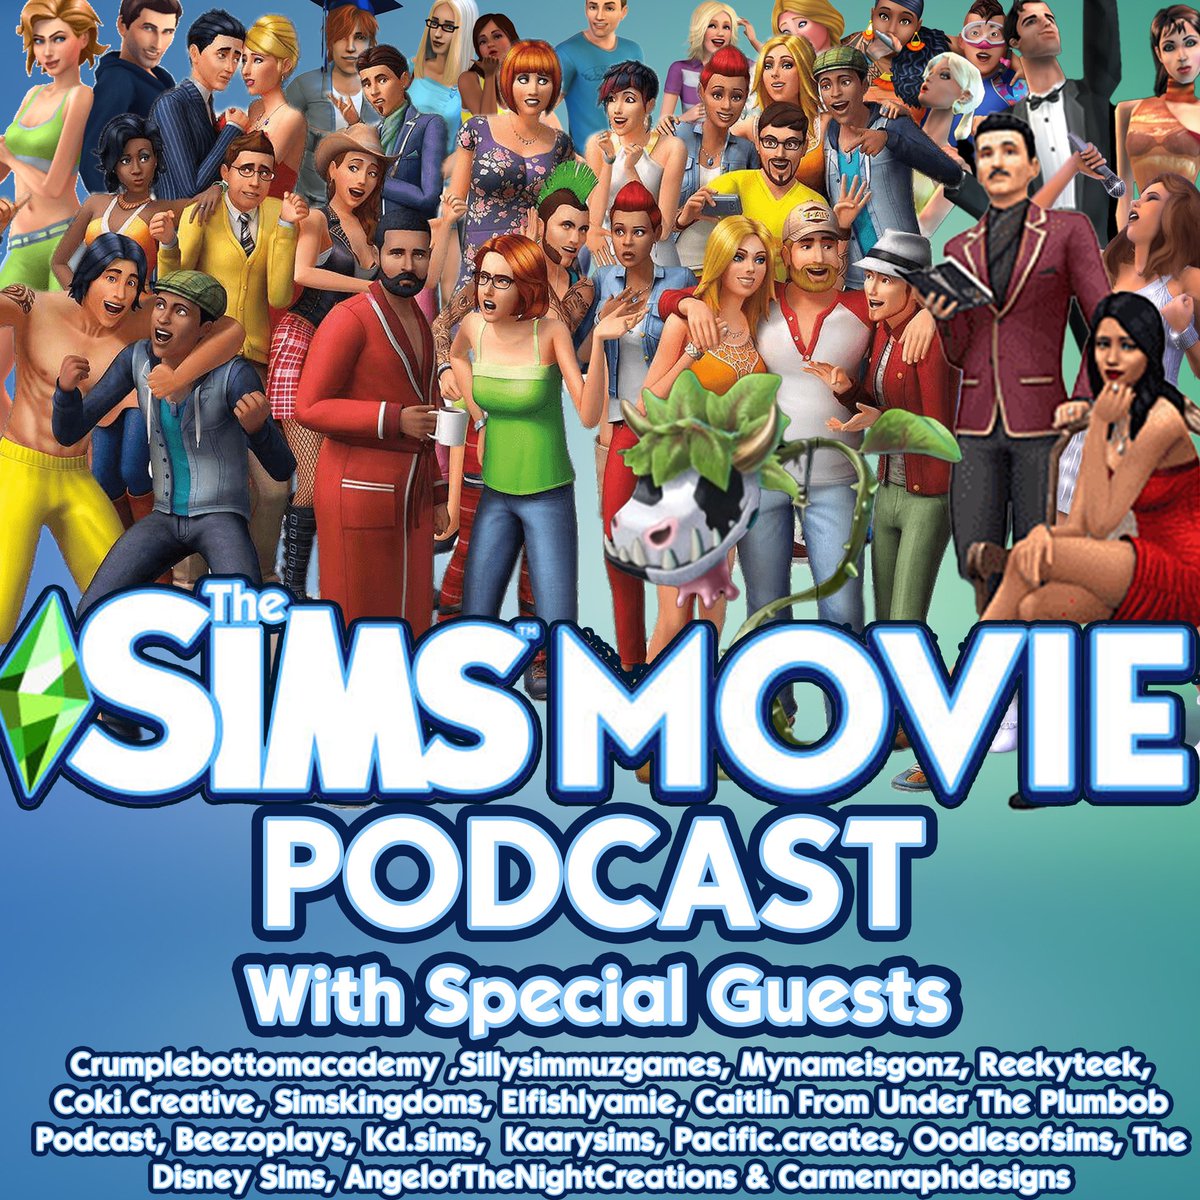 Coke come check out this exclusive podcast where we talk about the sims movie @sillysimmuz @mynameisgonz @CokiCreative @ElfishlyAmie @plumbobcast @BeezoPlays @KaarySims @pacificcreates @OodlesofNoodle_ open.spotify.com/episode/0gb1H9…